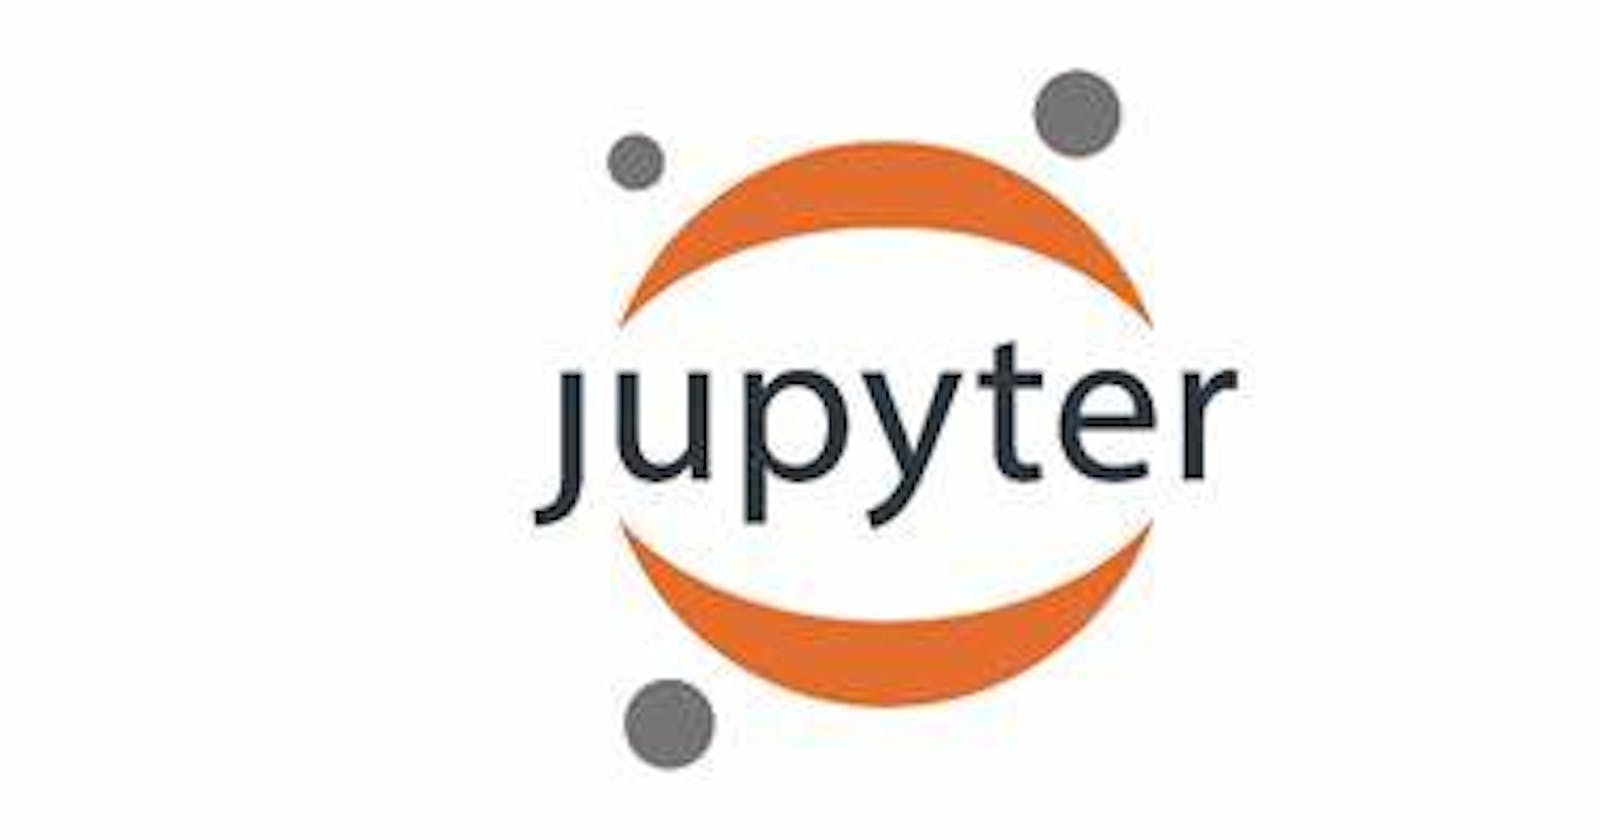 Launch of the New Jupyter Book